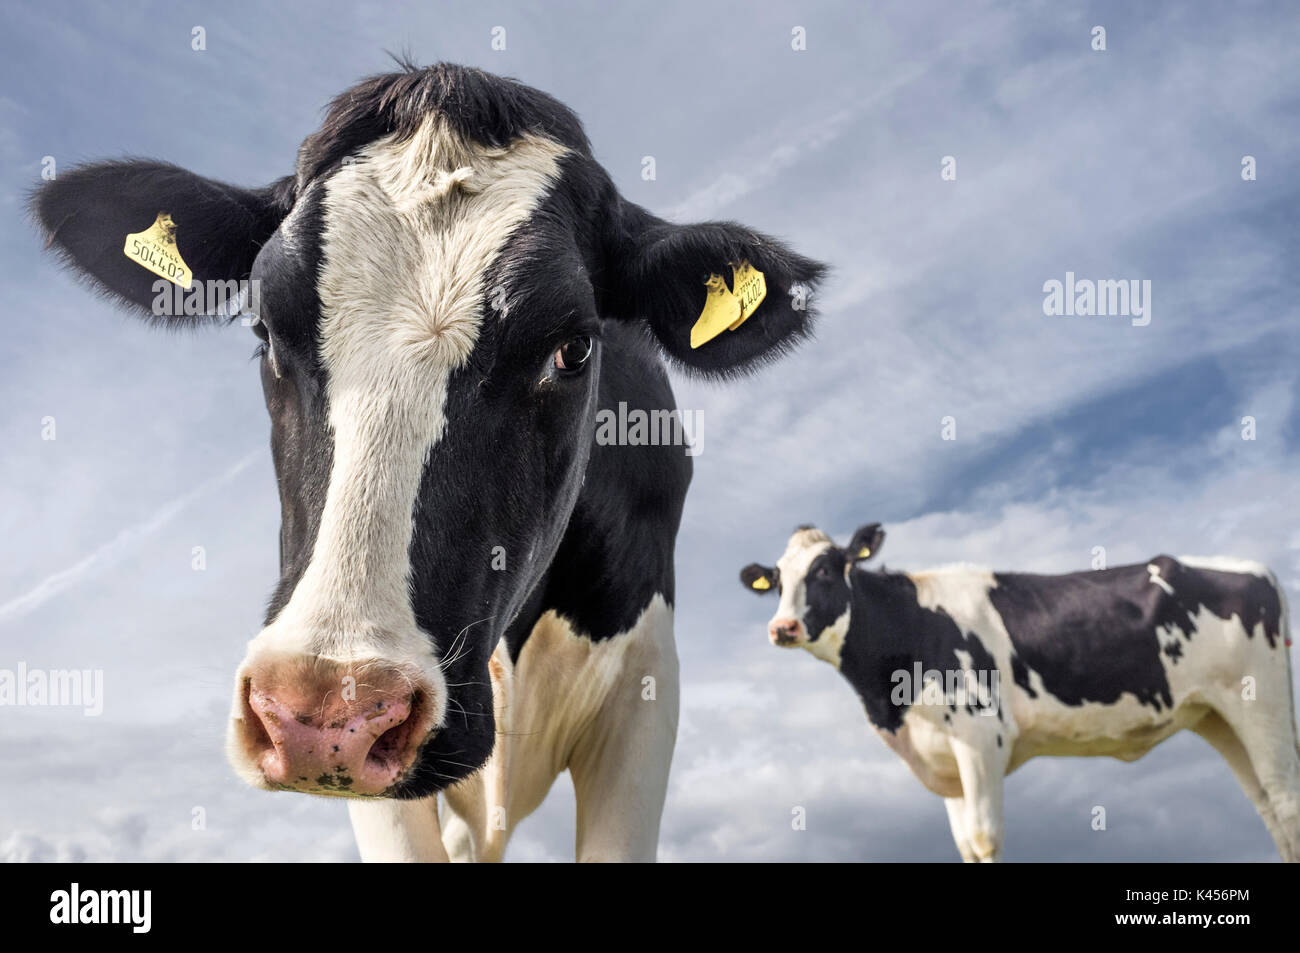 Curious cows in a field in South Wales on a sunny day Stock Photo